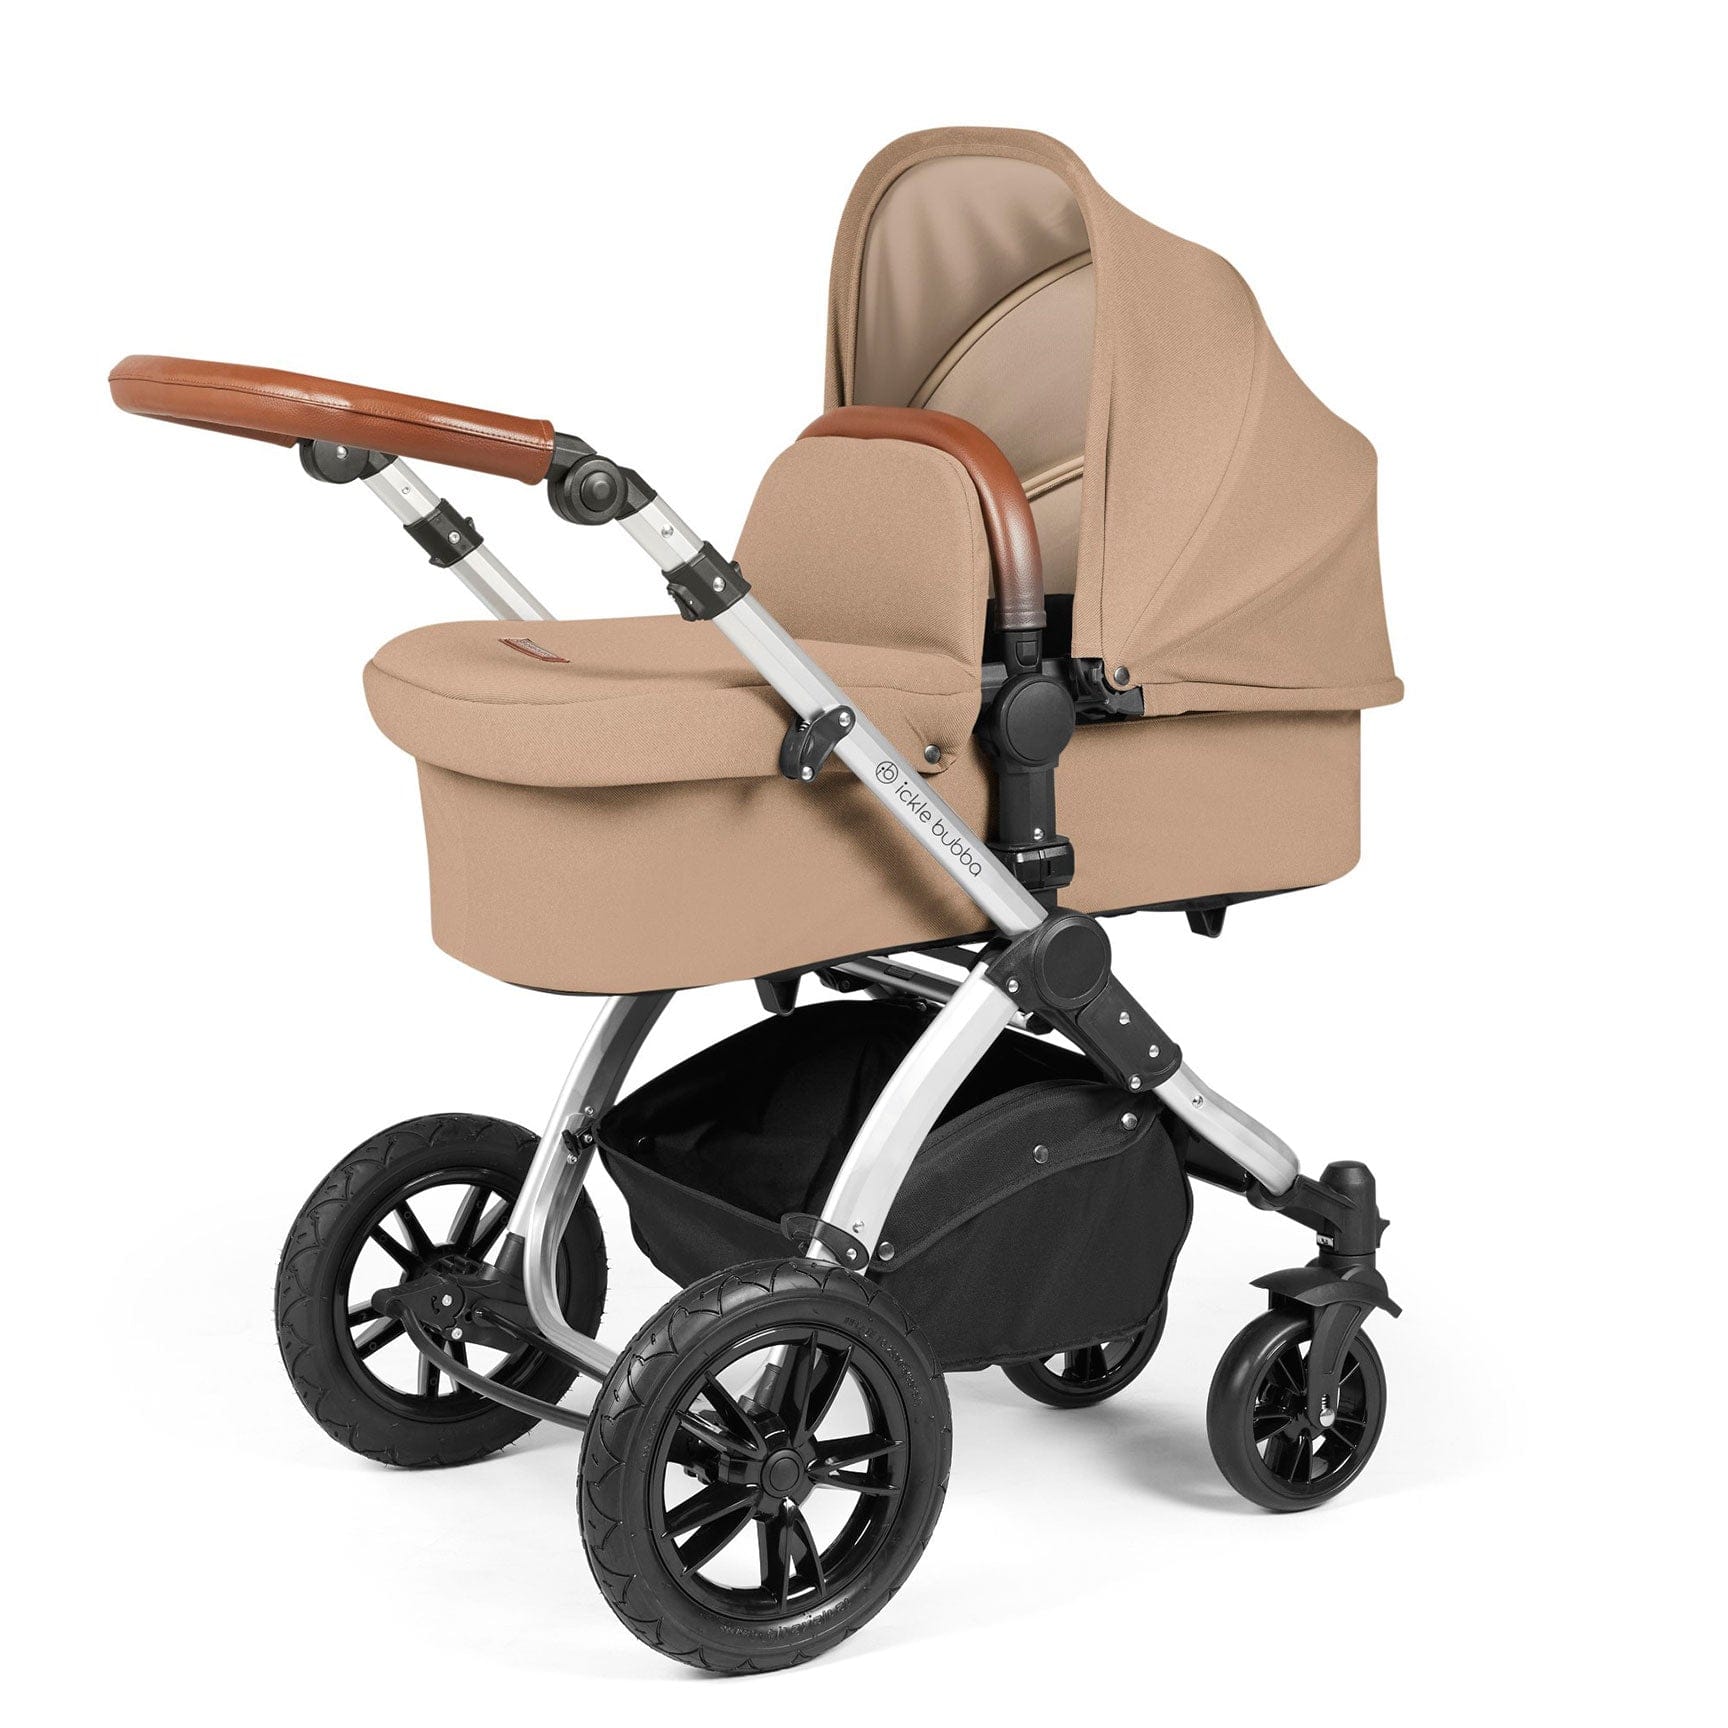 Ickle Bubba travel systems Ickle Bubba Stomp Luxe All-in-One Travel System with Isofix Base - Silver/Desert/Tan 10-011-300-258